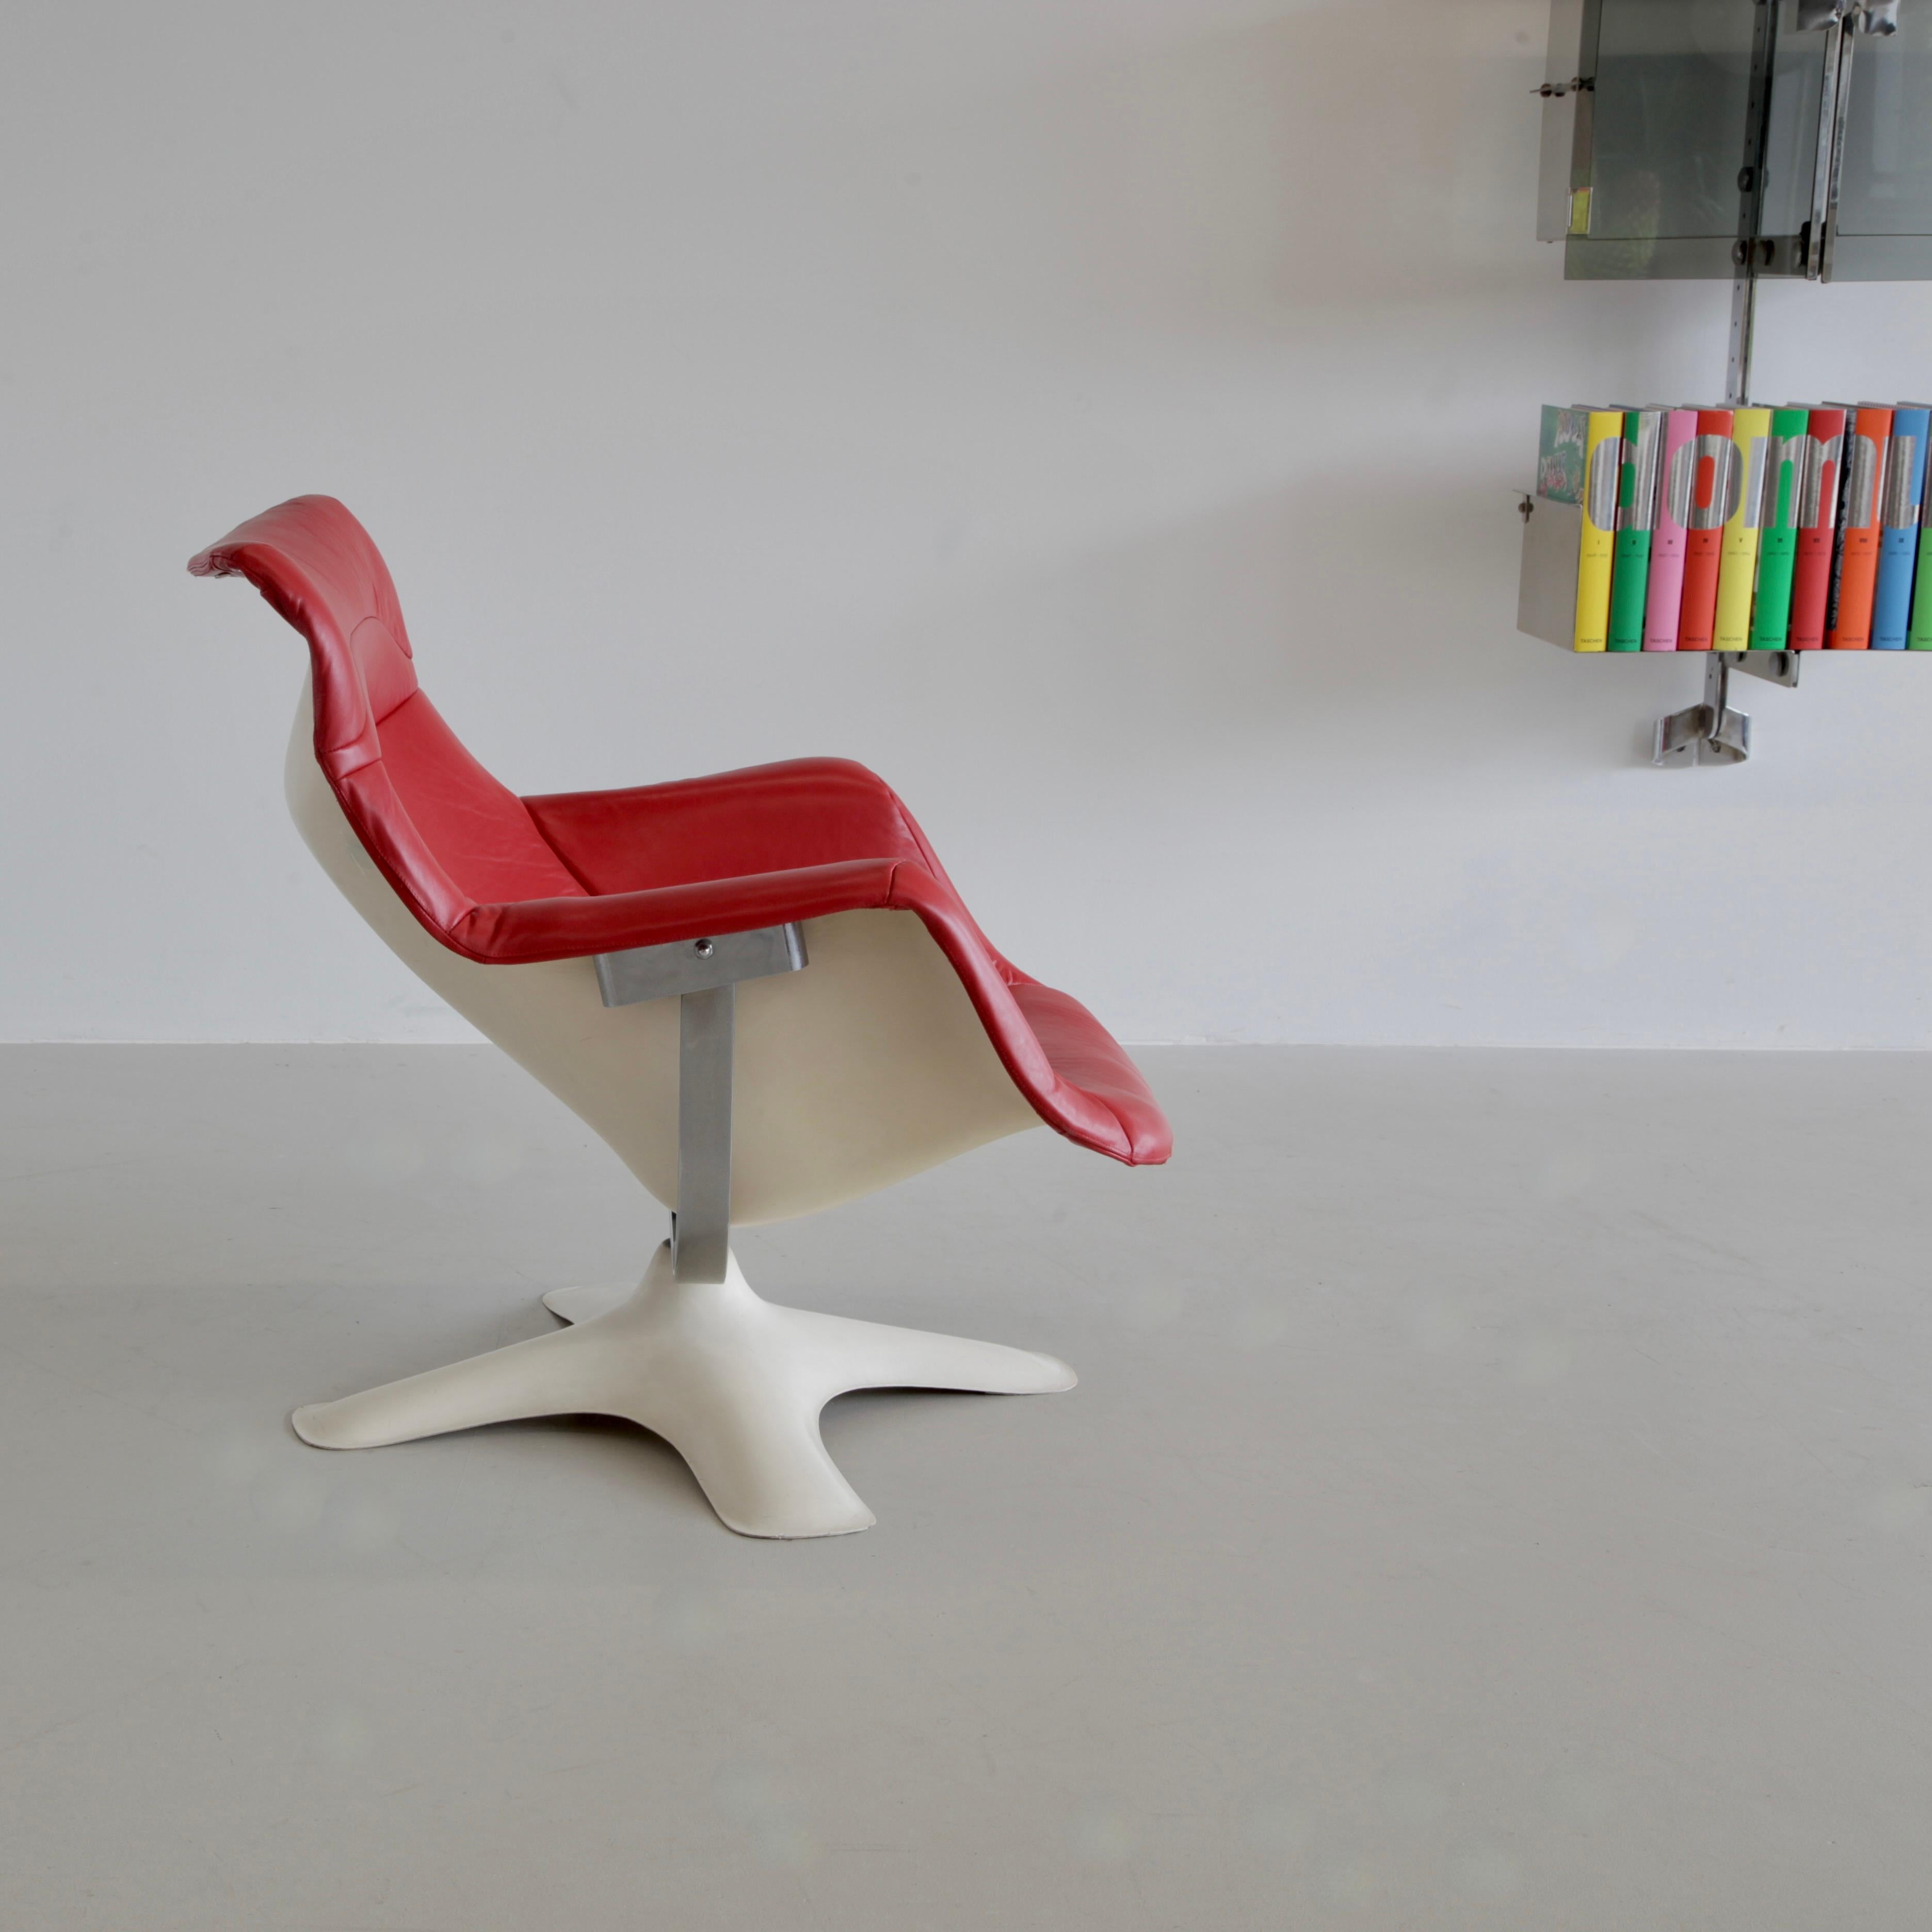 Lounge Chair, designed by Yrjö Kukkapuro. Finnland, Haimi, 1964.

Early Swivel and tilt armchair, produced in the late 1960s by Haimi. Organically shaped fibreglass shell, newly upholstered in deep red subtle leather. Suspended on a chromed metal